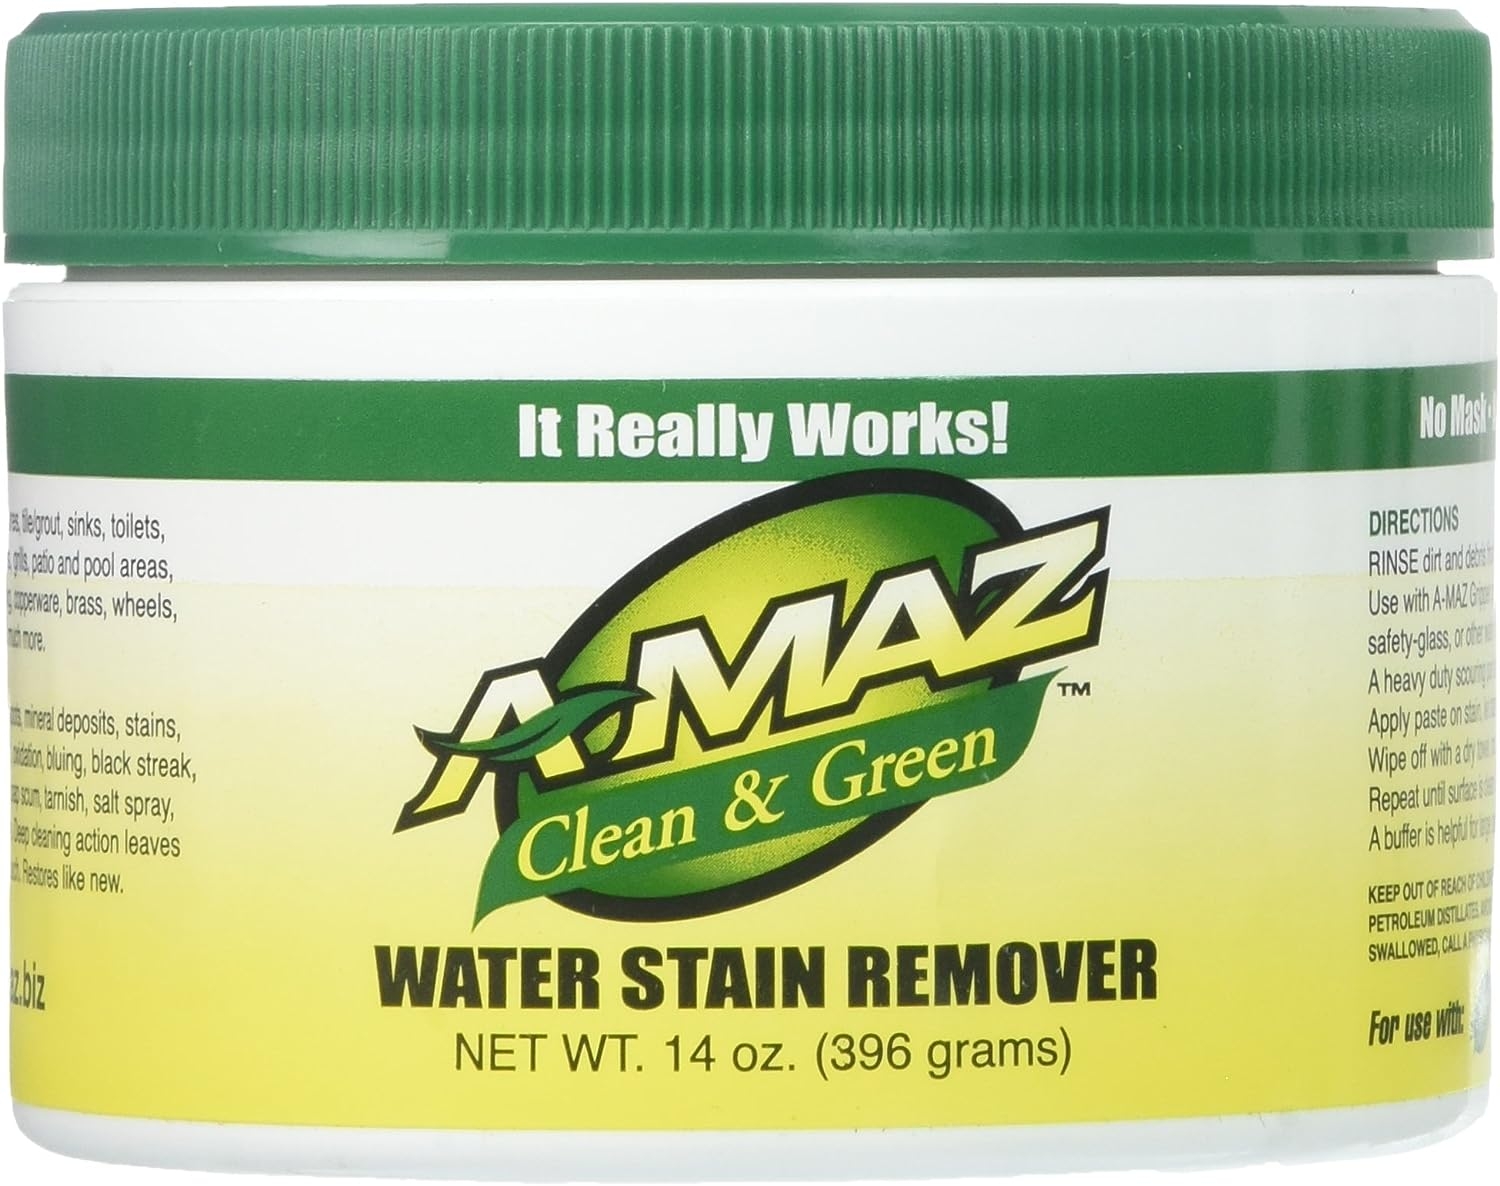 AMAZ 11107 Water Stain Remover 14 ounces ( Packaging may vary)   price checker   price checker Description Gallery Reviews